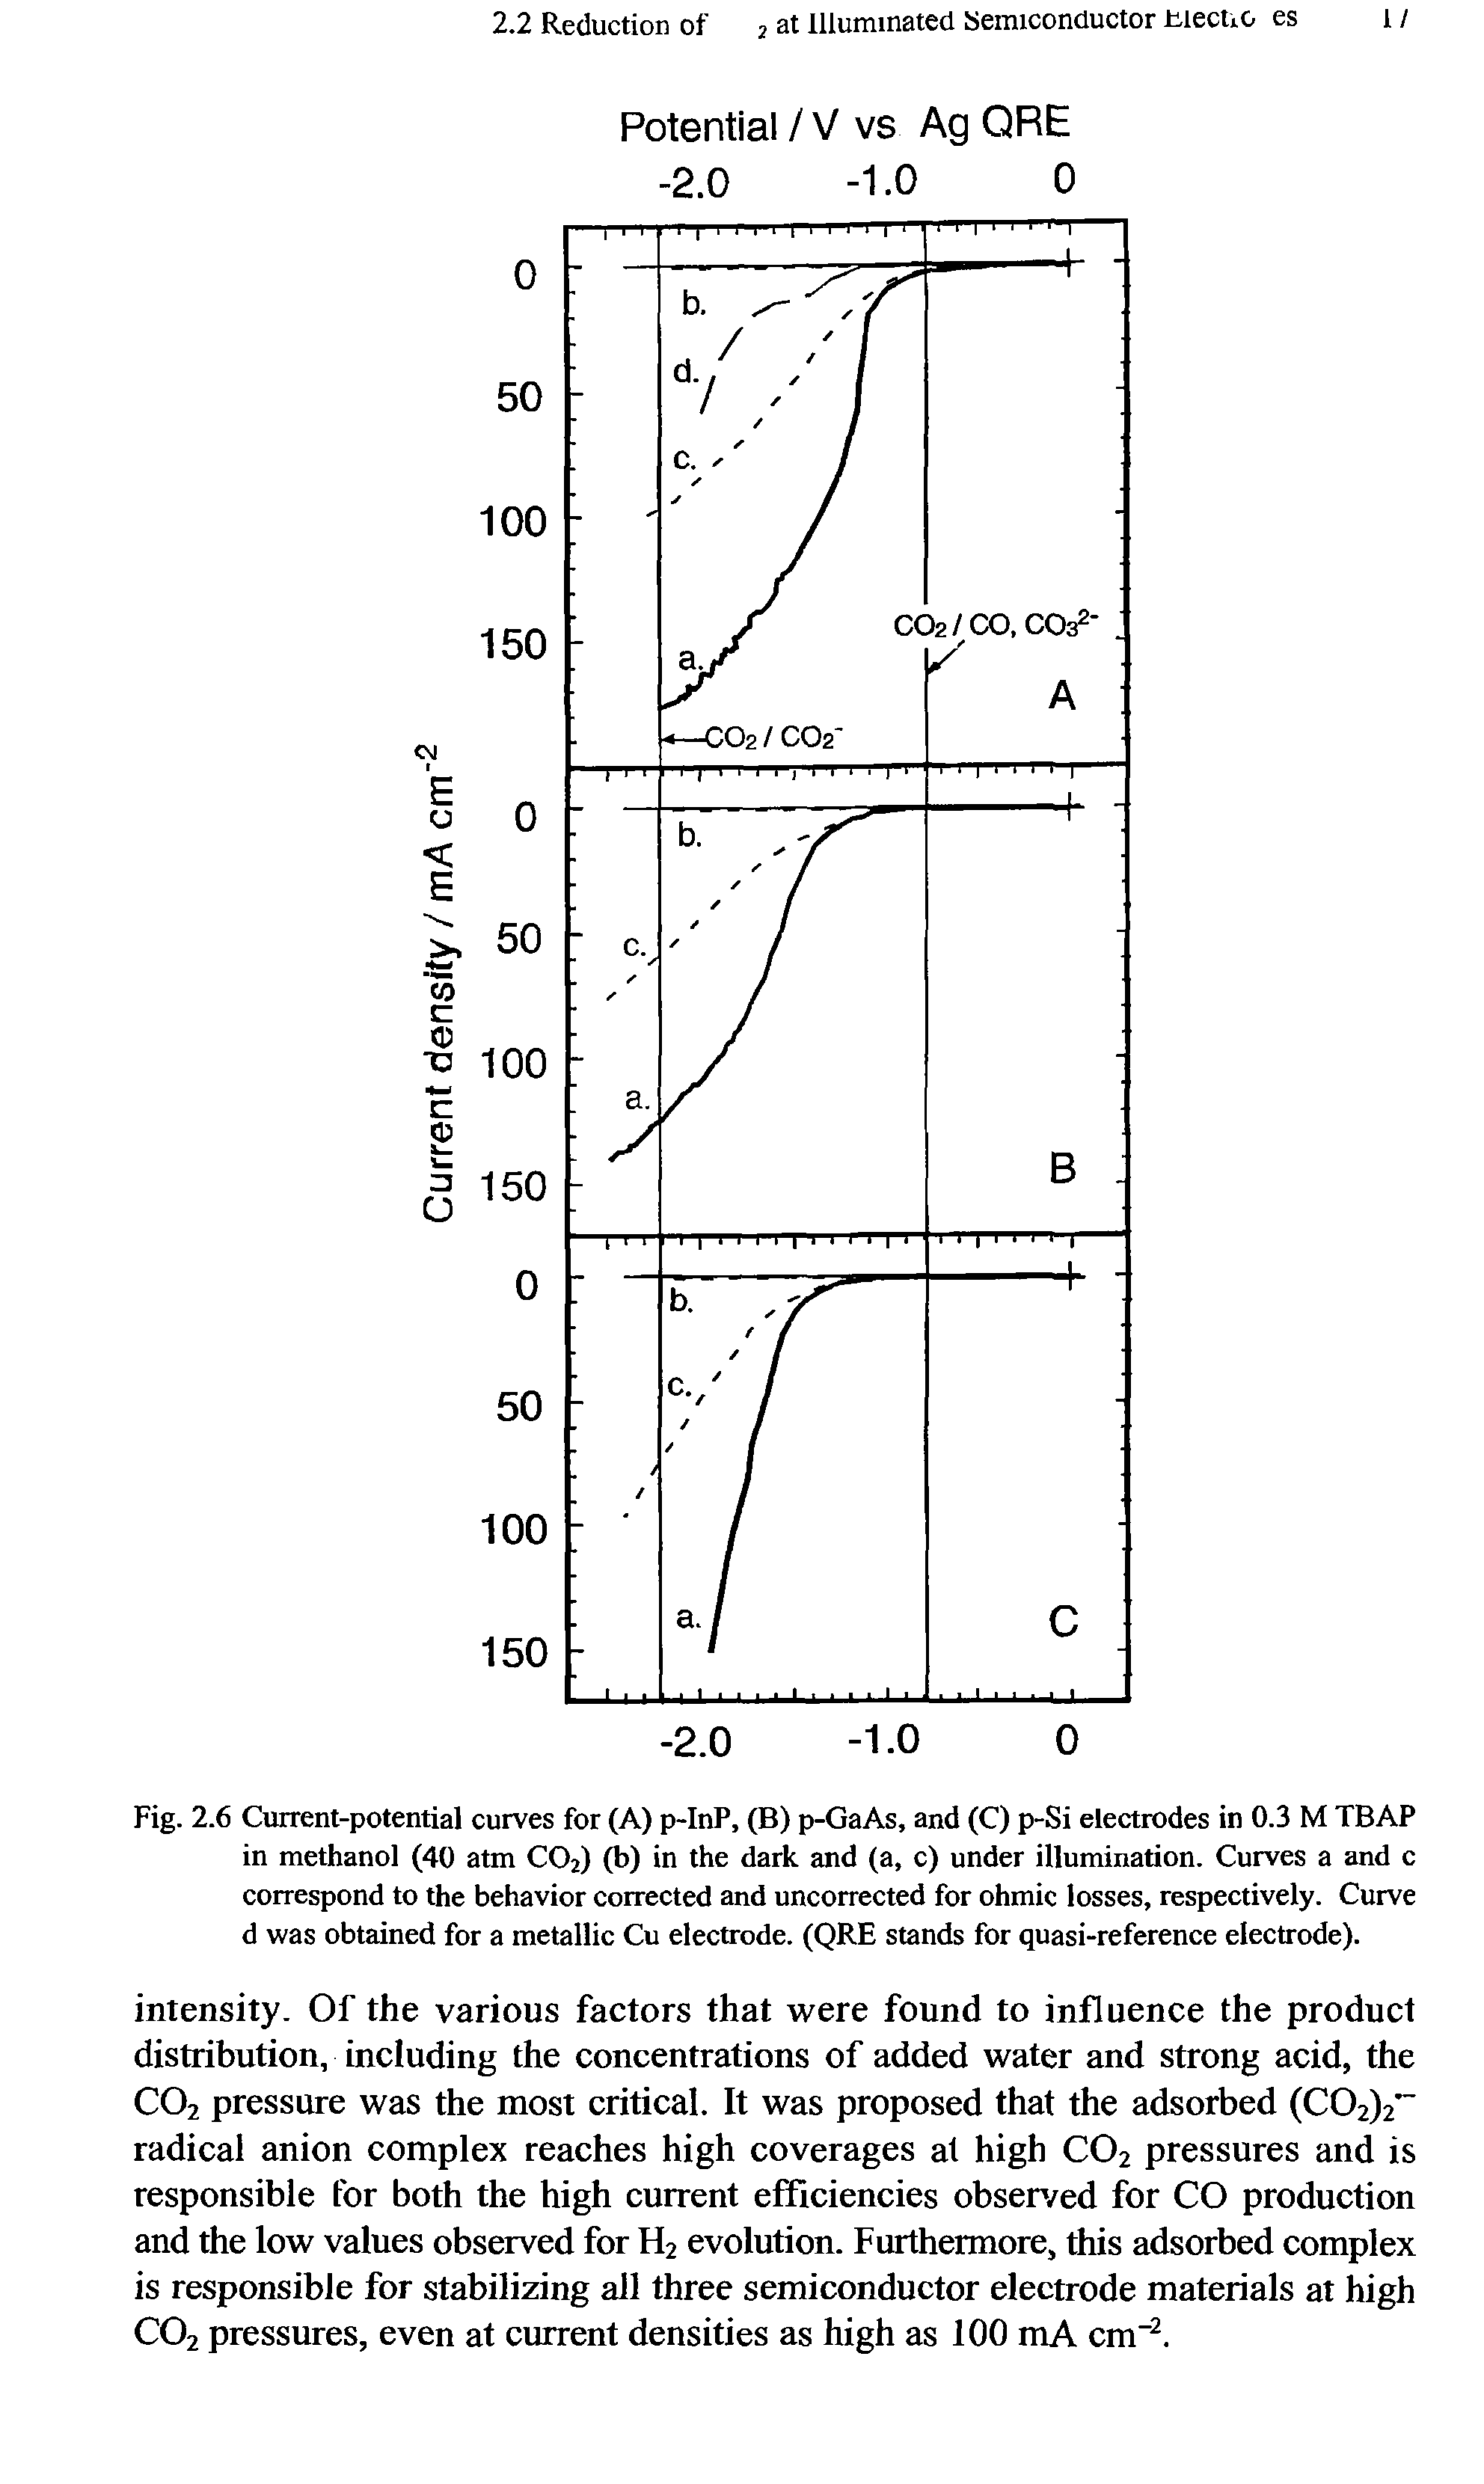 Fig. 2.6 Current-potential curves for (A) p-InP, (B) p-GaAs, and (C) p-Si electrodes in 0.3 M TBAP in methanol (40 atm C02) (b) in the dark and (a, c) under illumination. Curves a and c correspond to the behavior corrected and uncorrected for ohmic losses, respectively. Curve d was obtained for a metallic Cu electrode. (QRE stands for quasi-reference electrode).